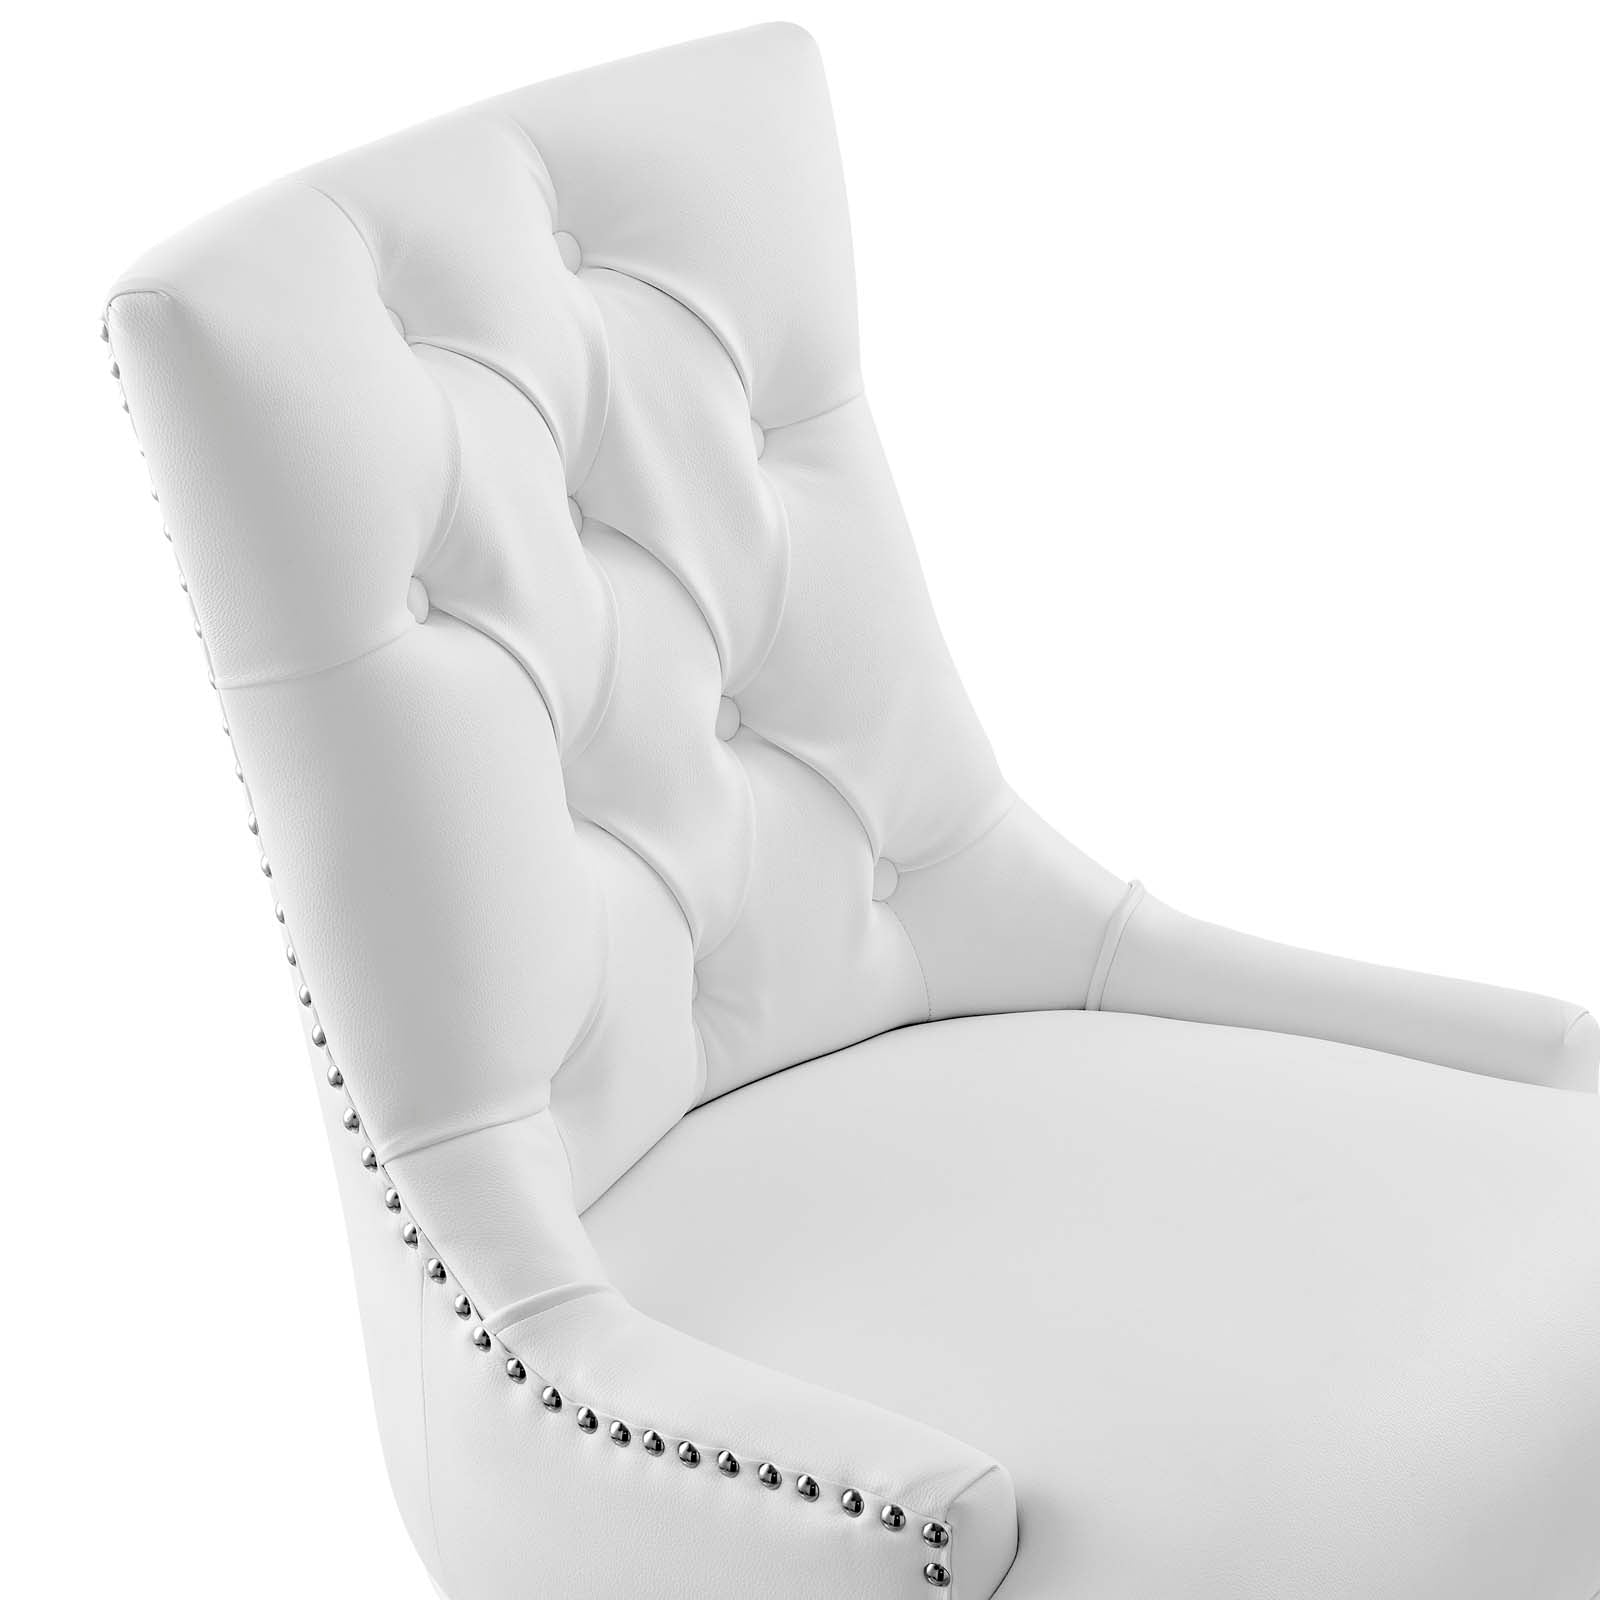 Modway Task Chairs - Regent Tufted Vegan Leather Office Chair Black White